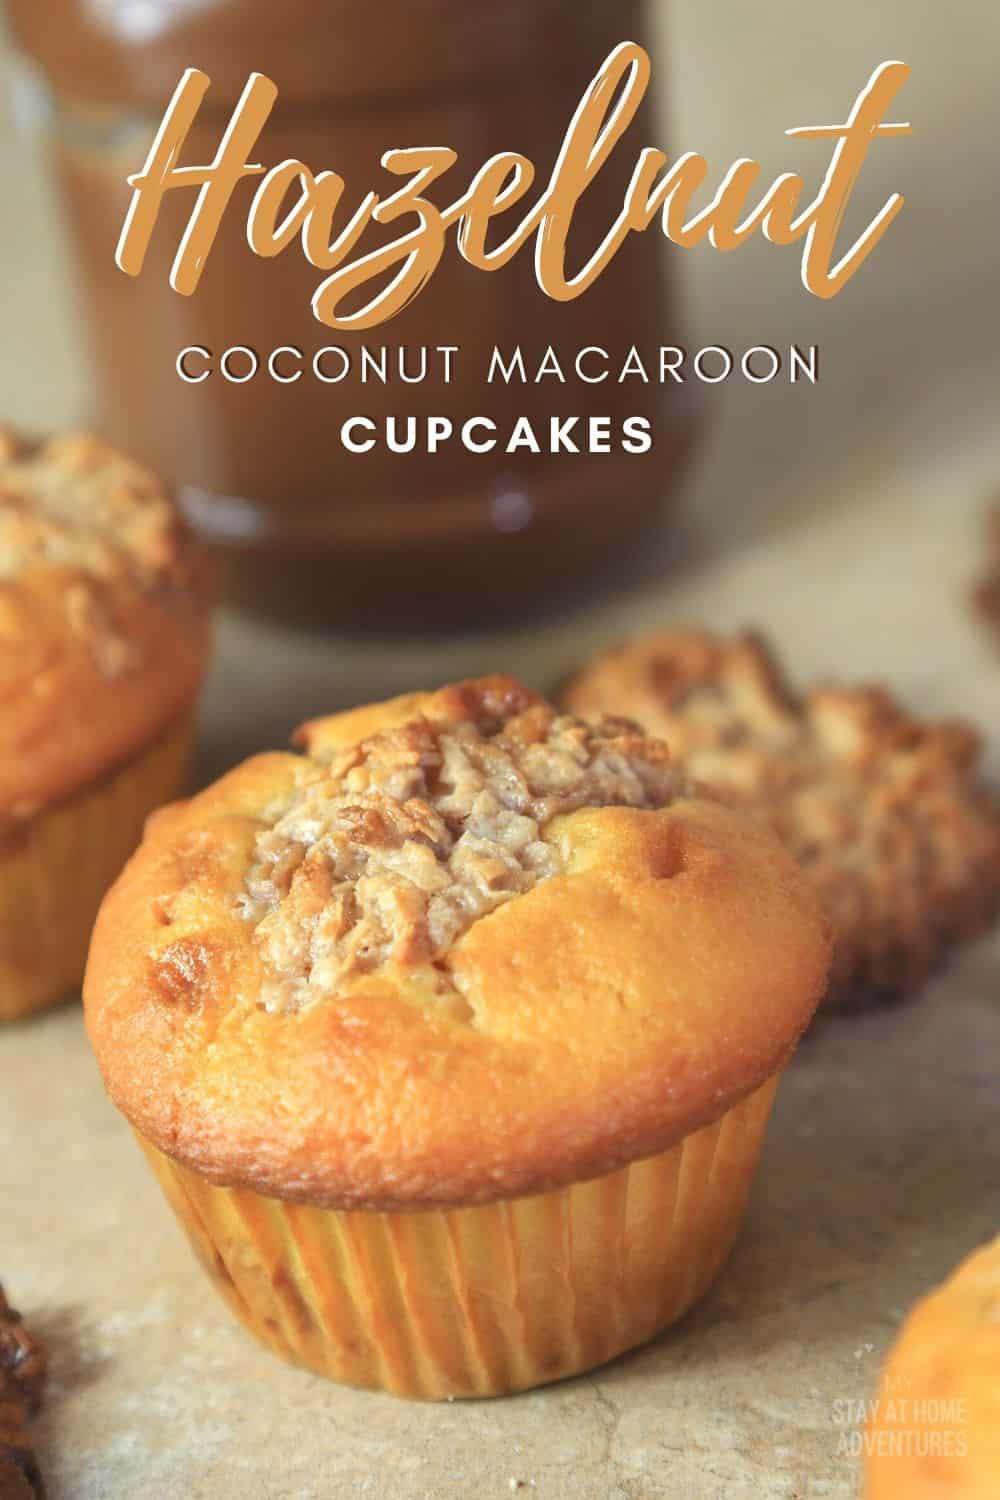 Calling all coconut macaroon lovers out there! Delicious cupcakes filled with hazelnut (Nutella) coconuts in the middle. via @mystayathome